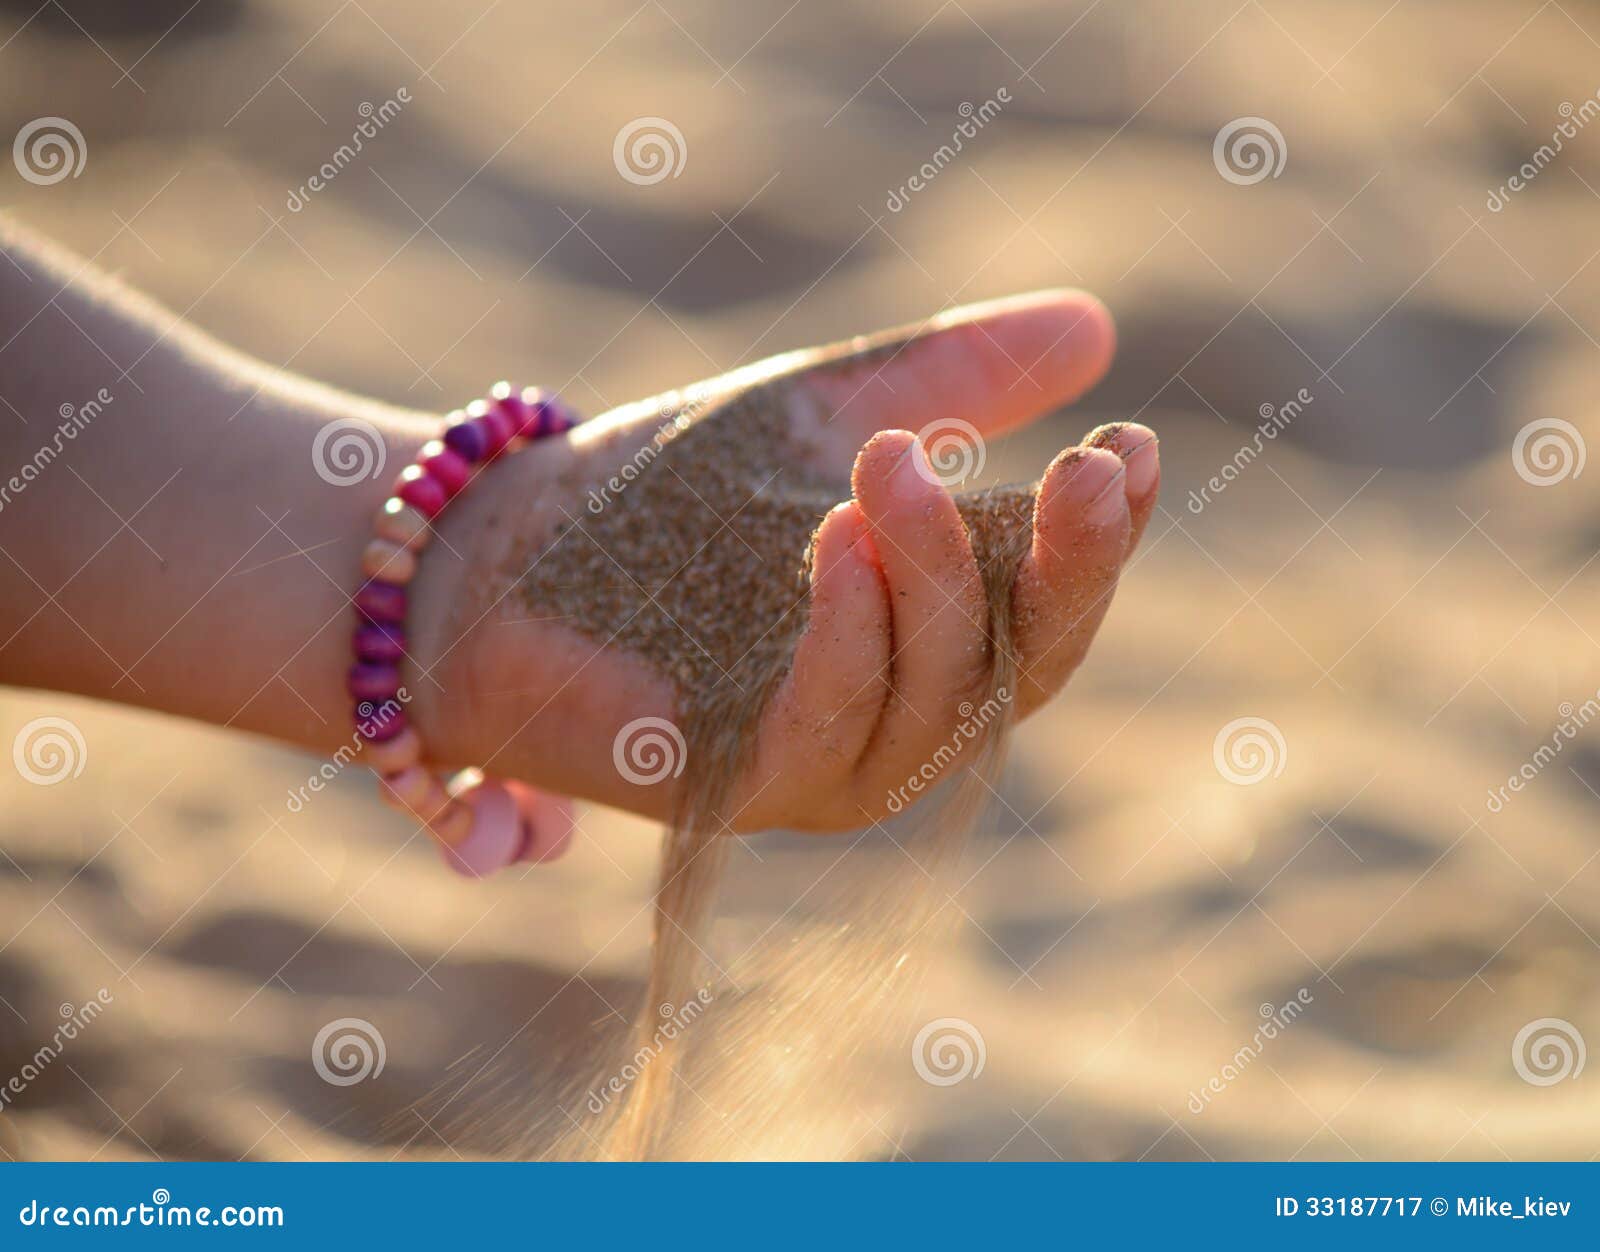 sand pours out of the child hand